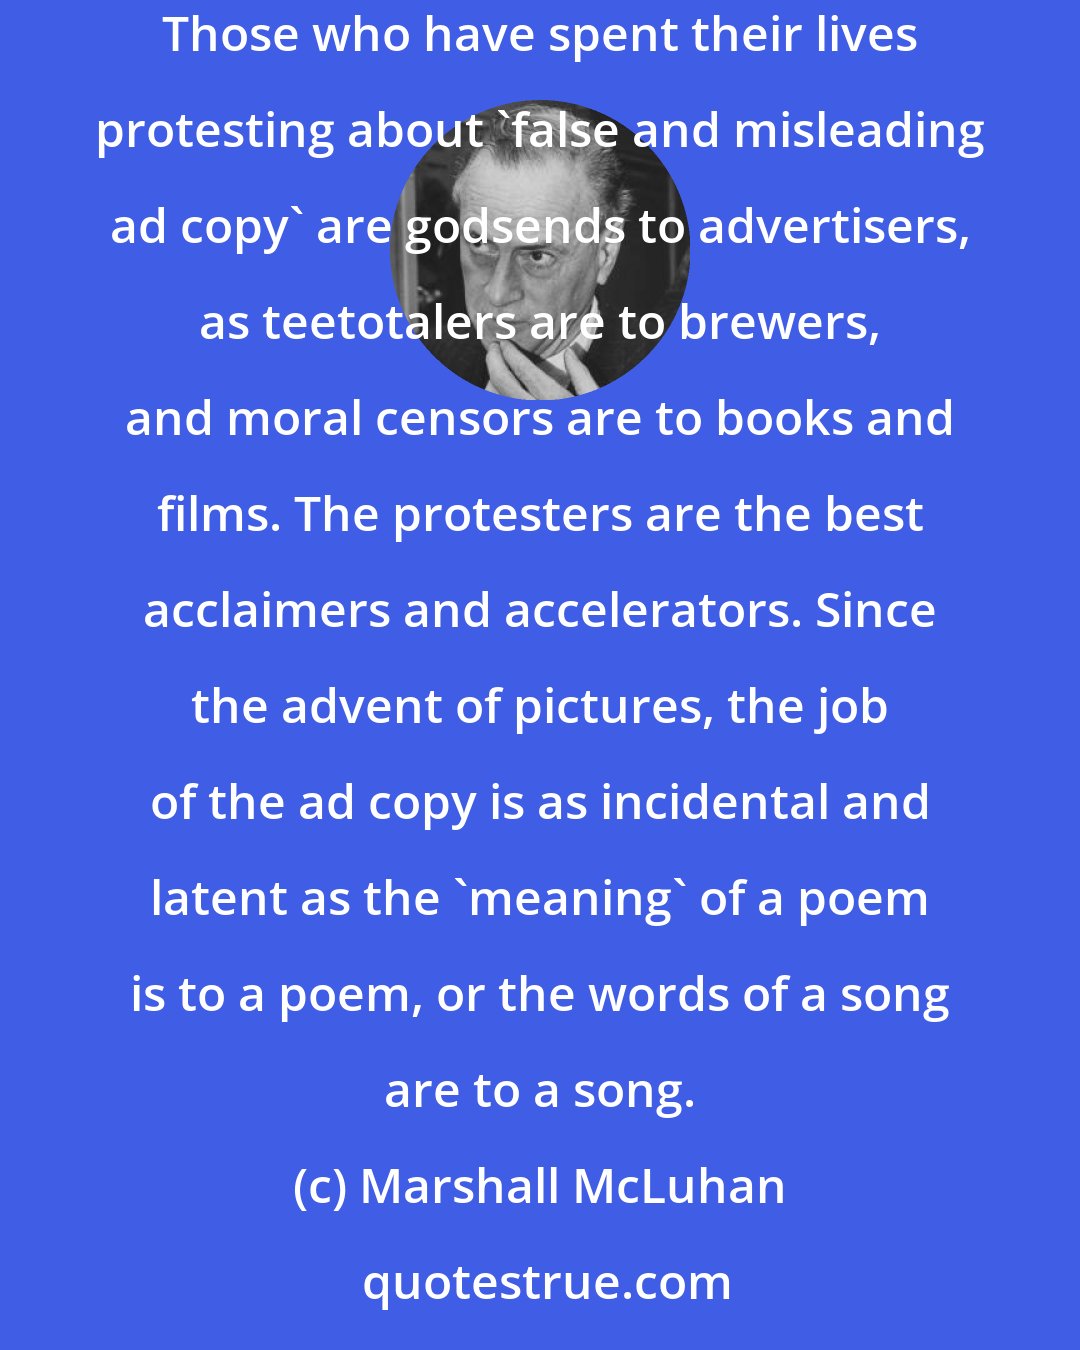 Marshall McLuhan: The copy of an ad is merely a punning gag to distract the critical faculties while the image of the product goes to work on the hypnotized viewer. Those who have spent their lives protesting about 'false and misleading ad copy' are godsends to advertisers, as teetotalers are to brewers, and moral censors are to books and films. The protesters are the best acclaimers and accelerators. Since the advent of pictures, the job of the ad copy is as incidental and latent as the 'meaning' of a poem is to a poem, or the words of a song are to a song.